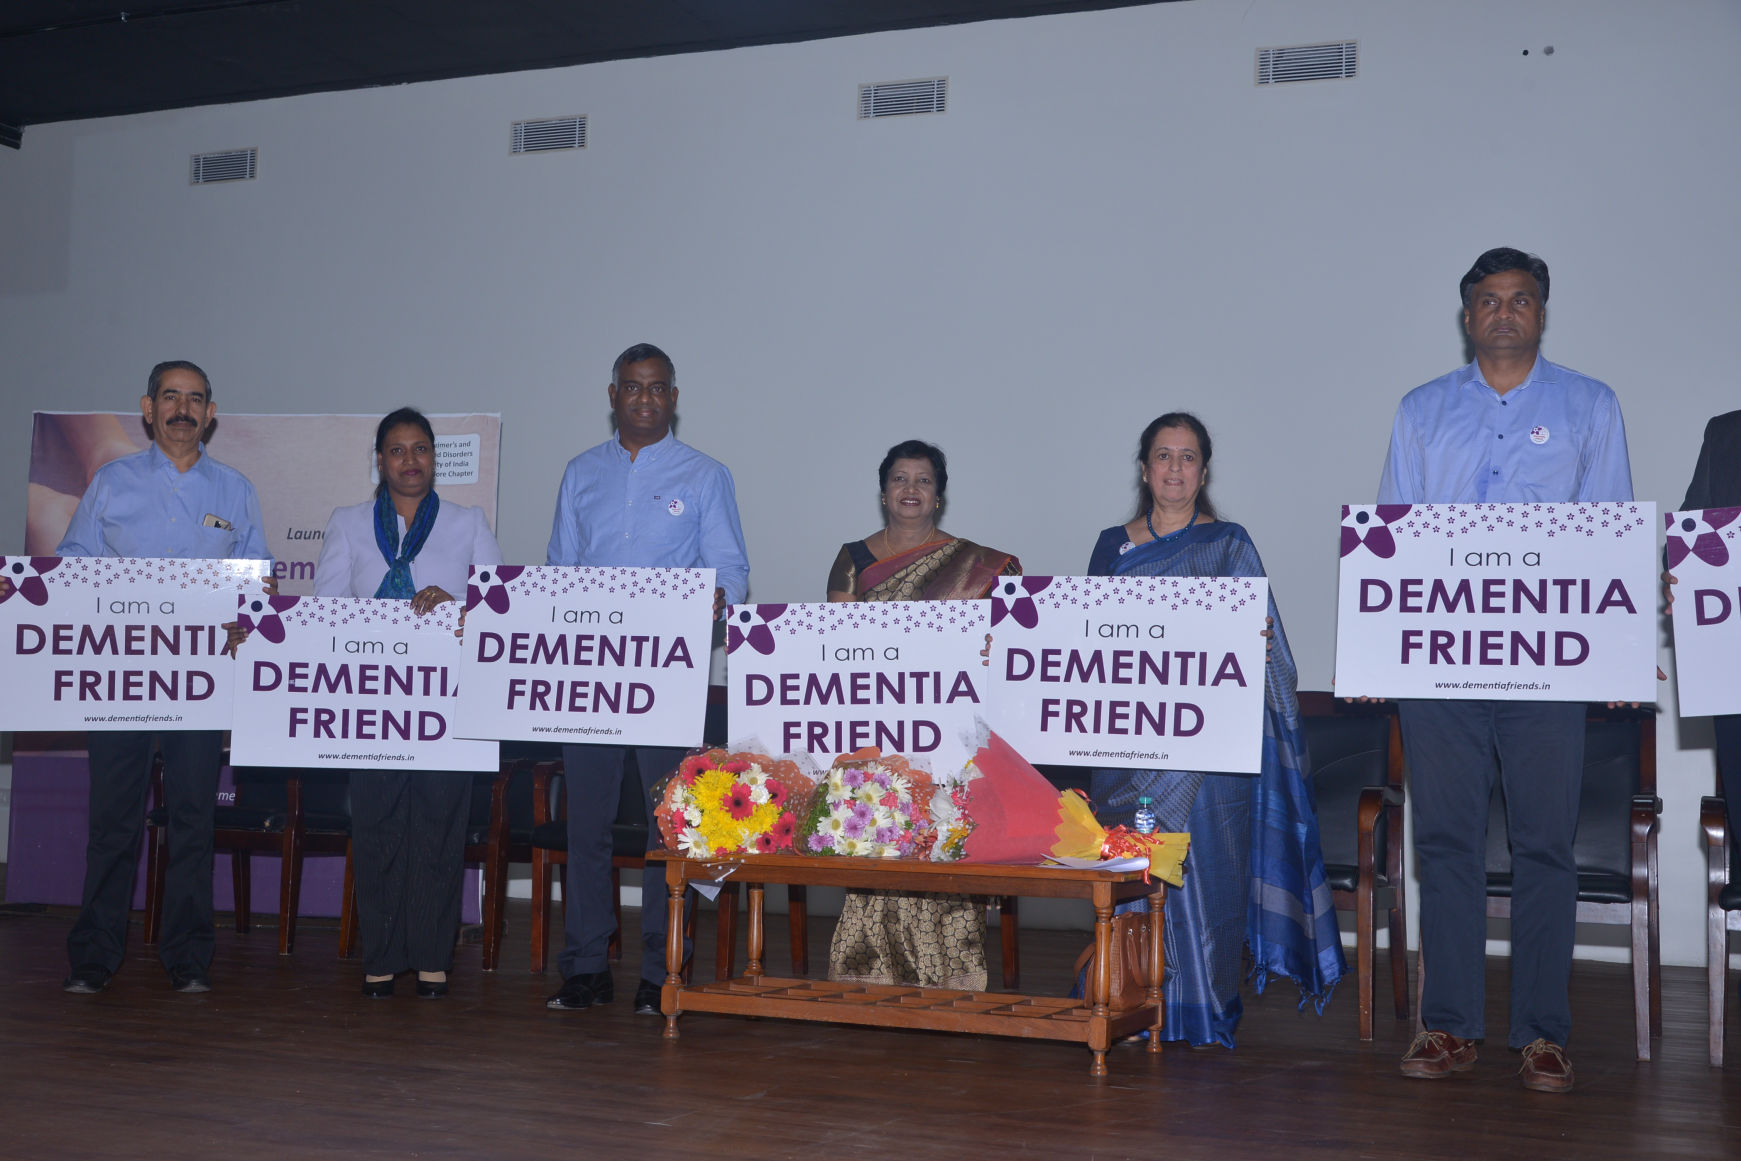 Javagal Srinath, the Ambassador for the Dementia Friends Program among other VIPs at the Launch of the Dementia Friends Movement